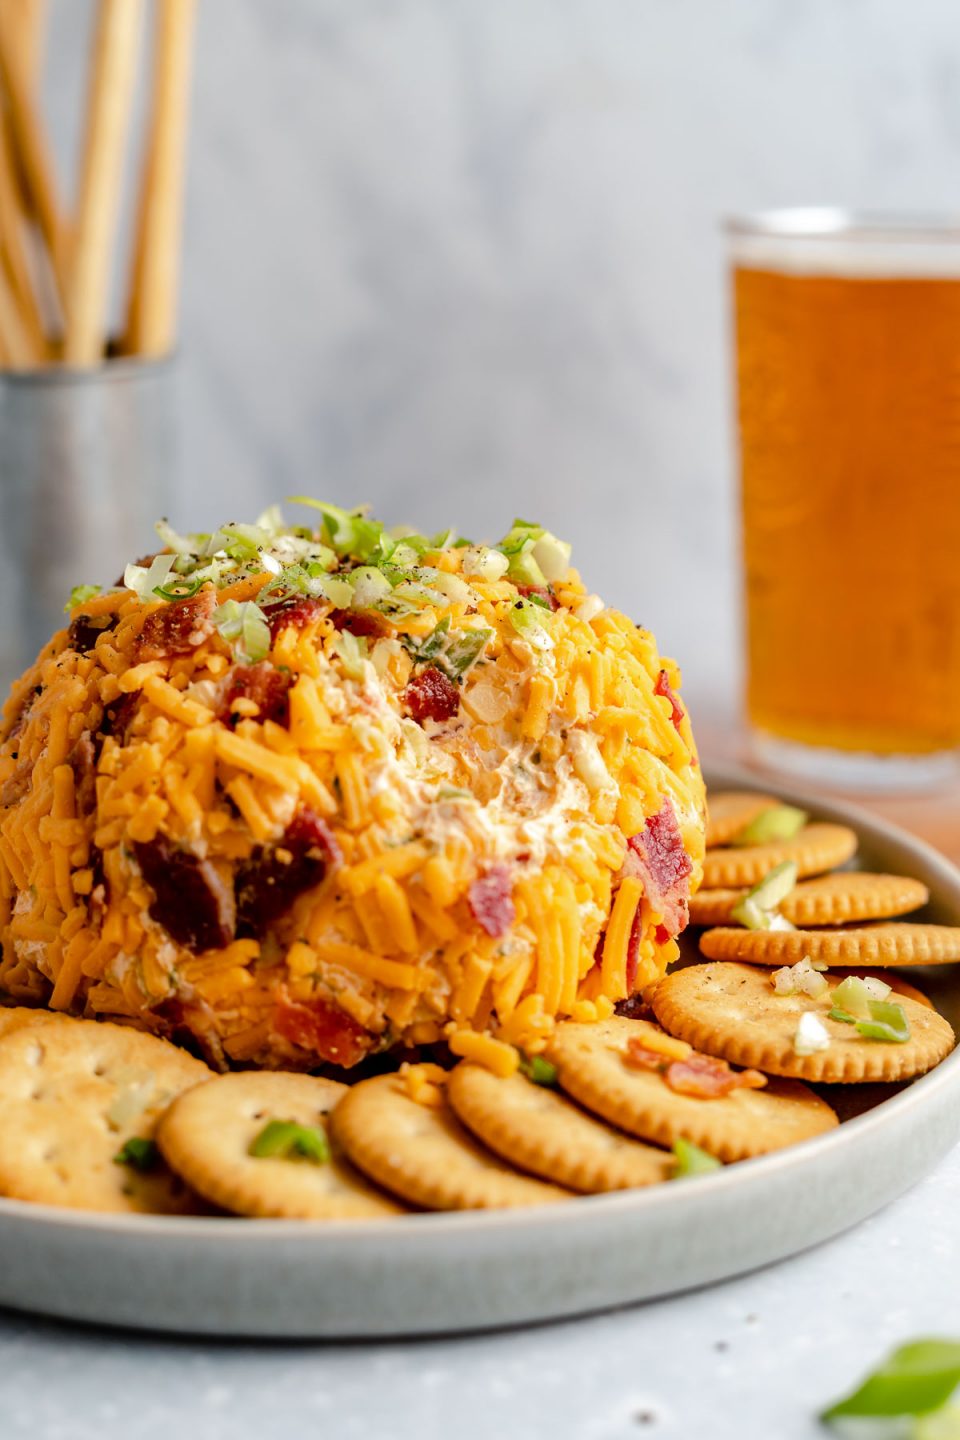 A side angle shot of a Bacon Cheddar Cheese ball sits atop a gray ceramic platter surrounded by a ring of Ritz crackers that have bits of green onion, bacon and shredded cheddar cheese sprinkled on top. The platter rests atop a gray-blue textured surface. A scoop of the cheese ball has been removed. A pint of amber colored beer and a silver container filled with breadstick crackers sits in the background out of focus.